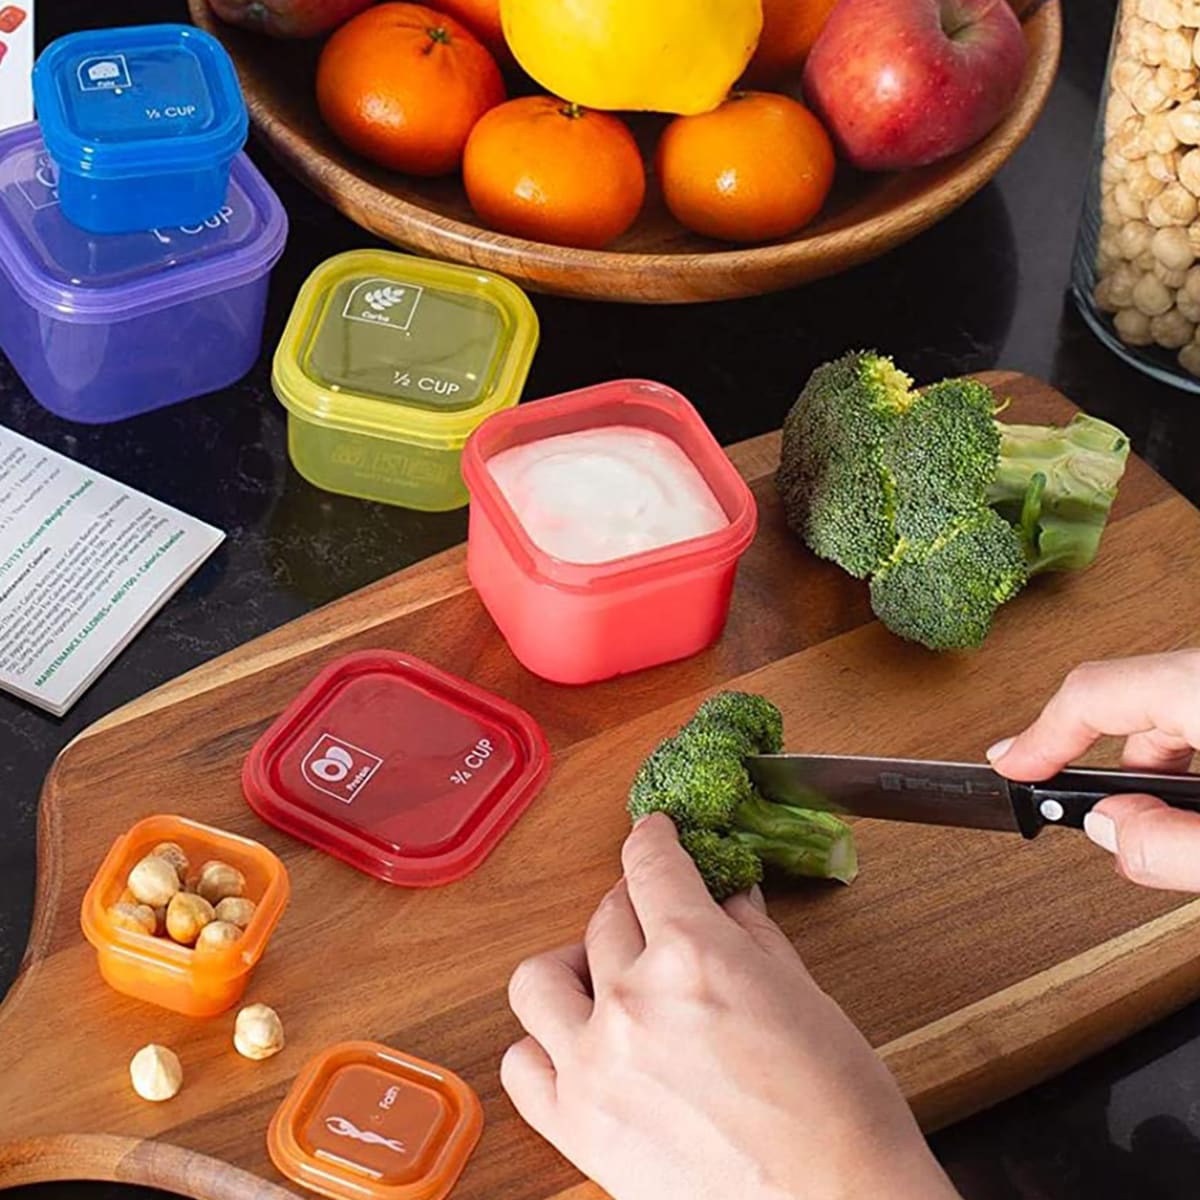 This Portion Control Container Kit Makes Weight Loss Easier - Men's Journal